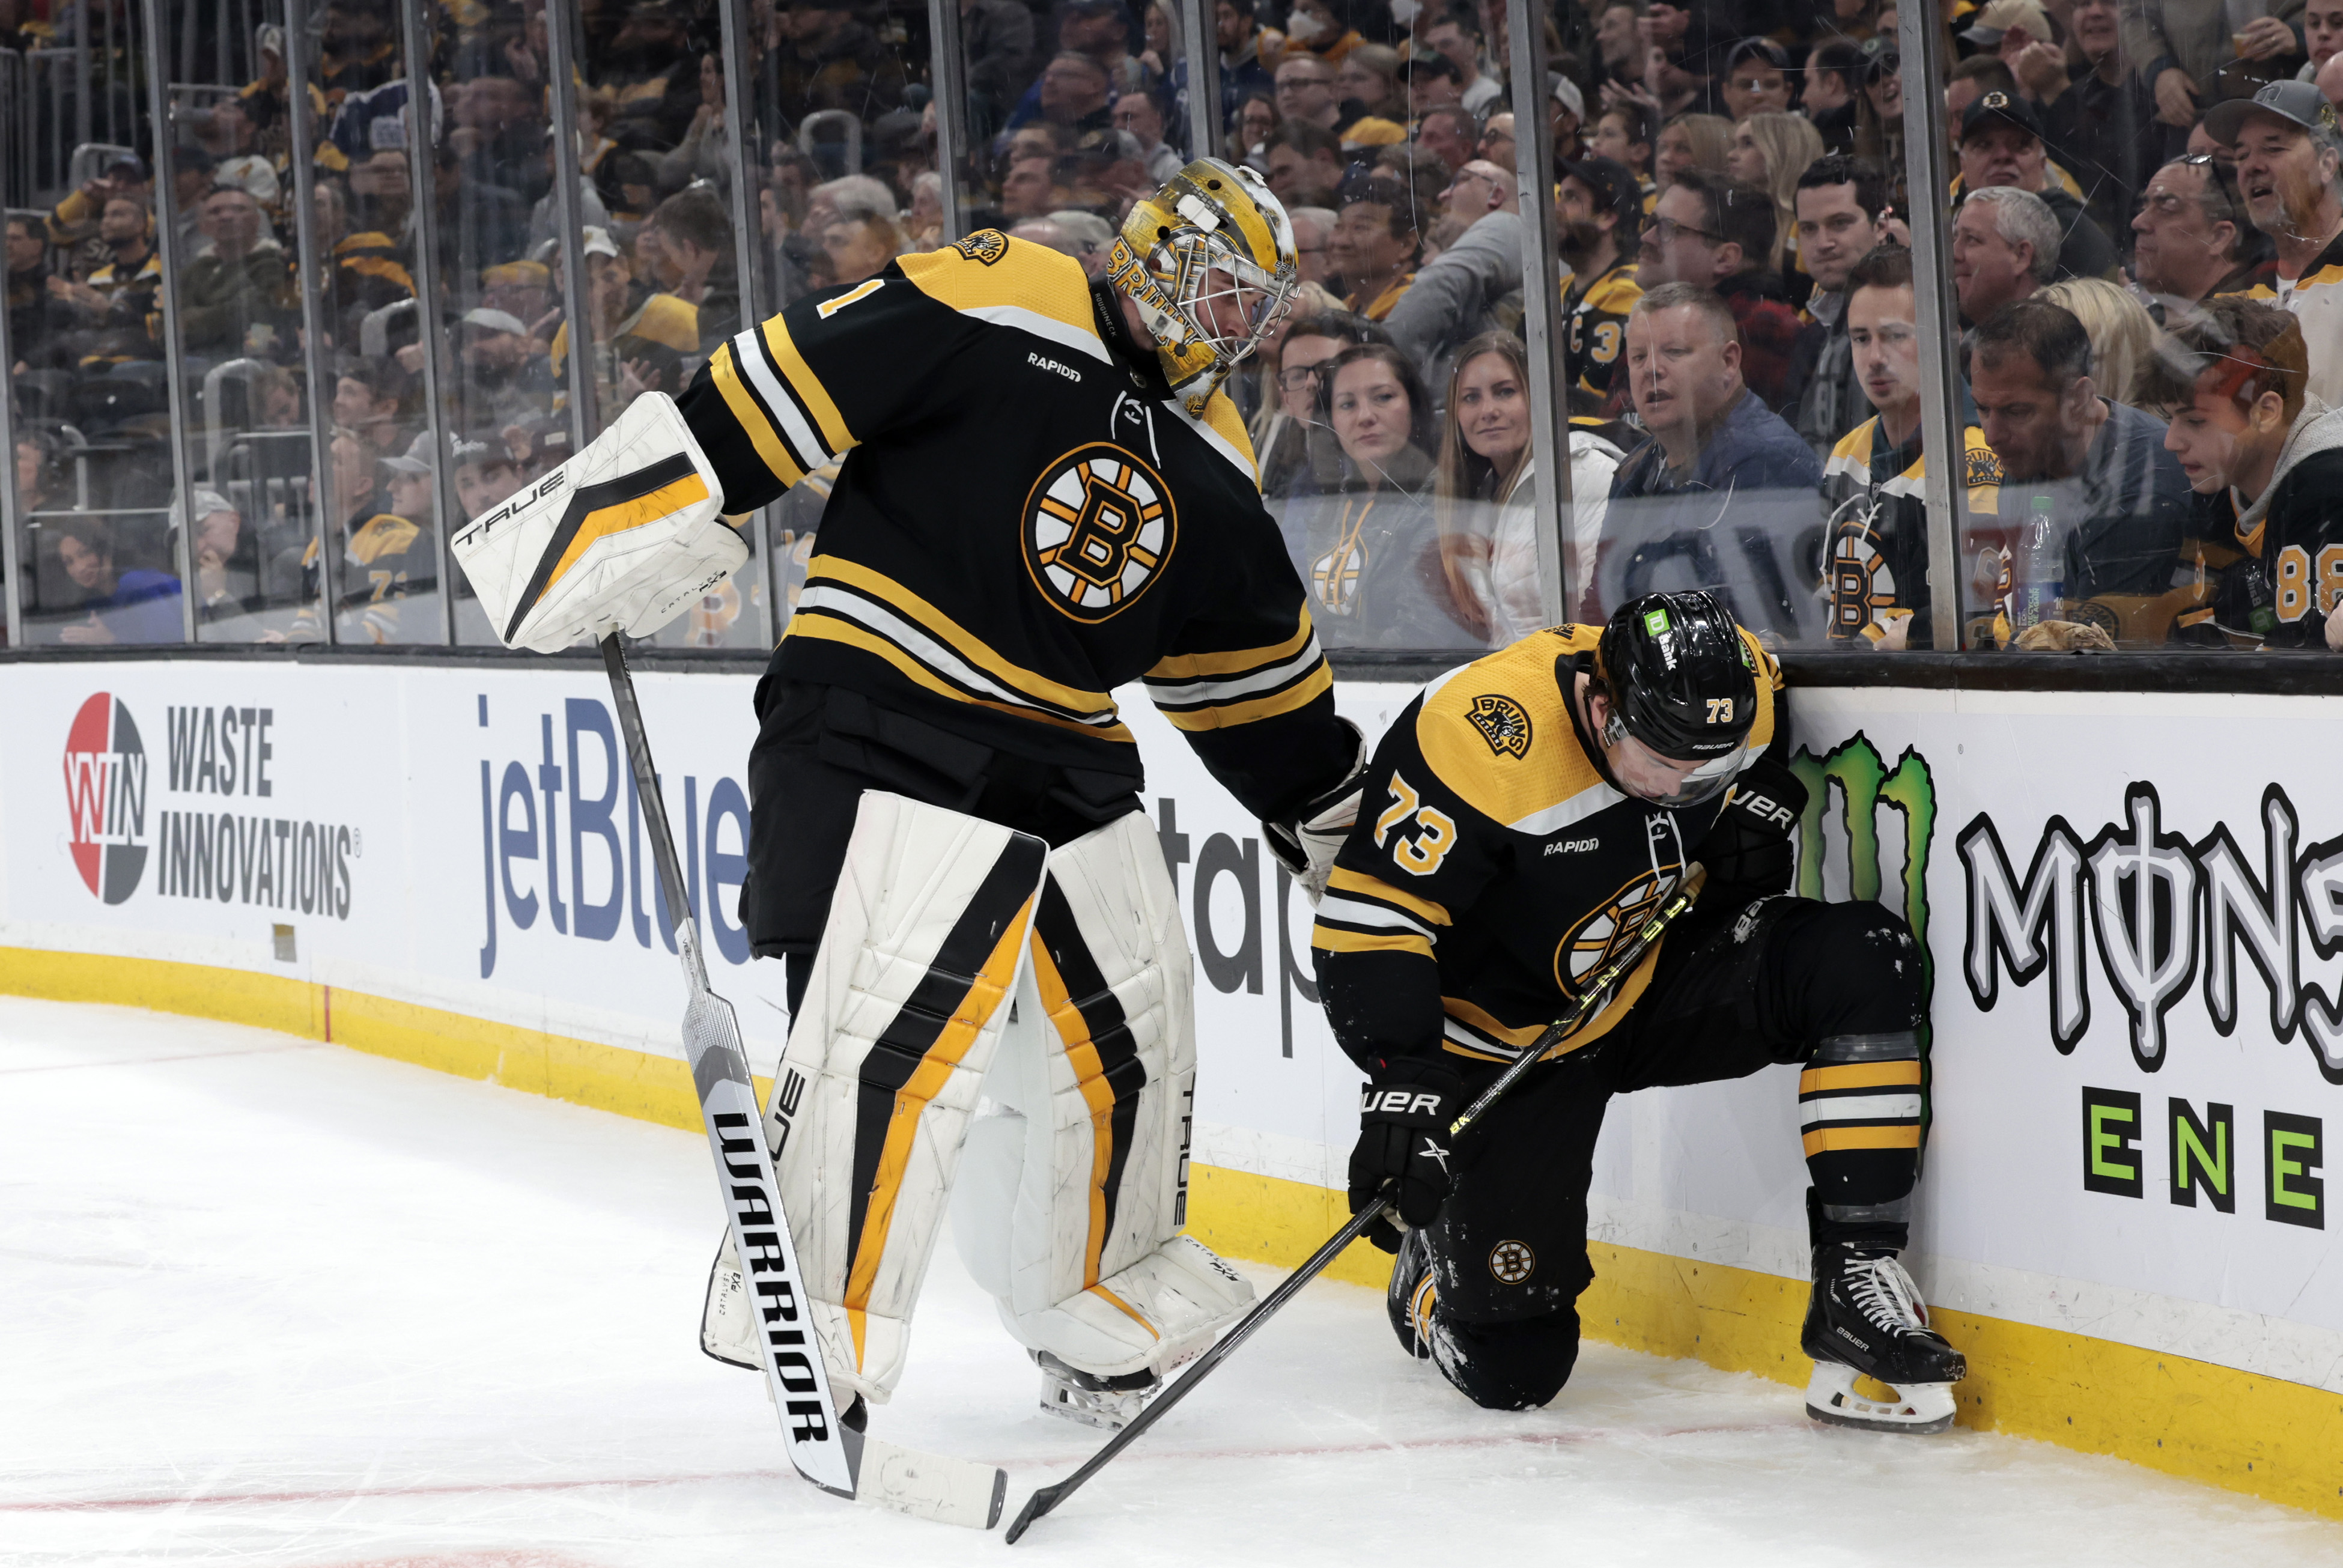 Bruins' Montgomery on Charlie McAvoy: 'He'll be playing within a week